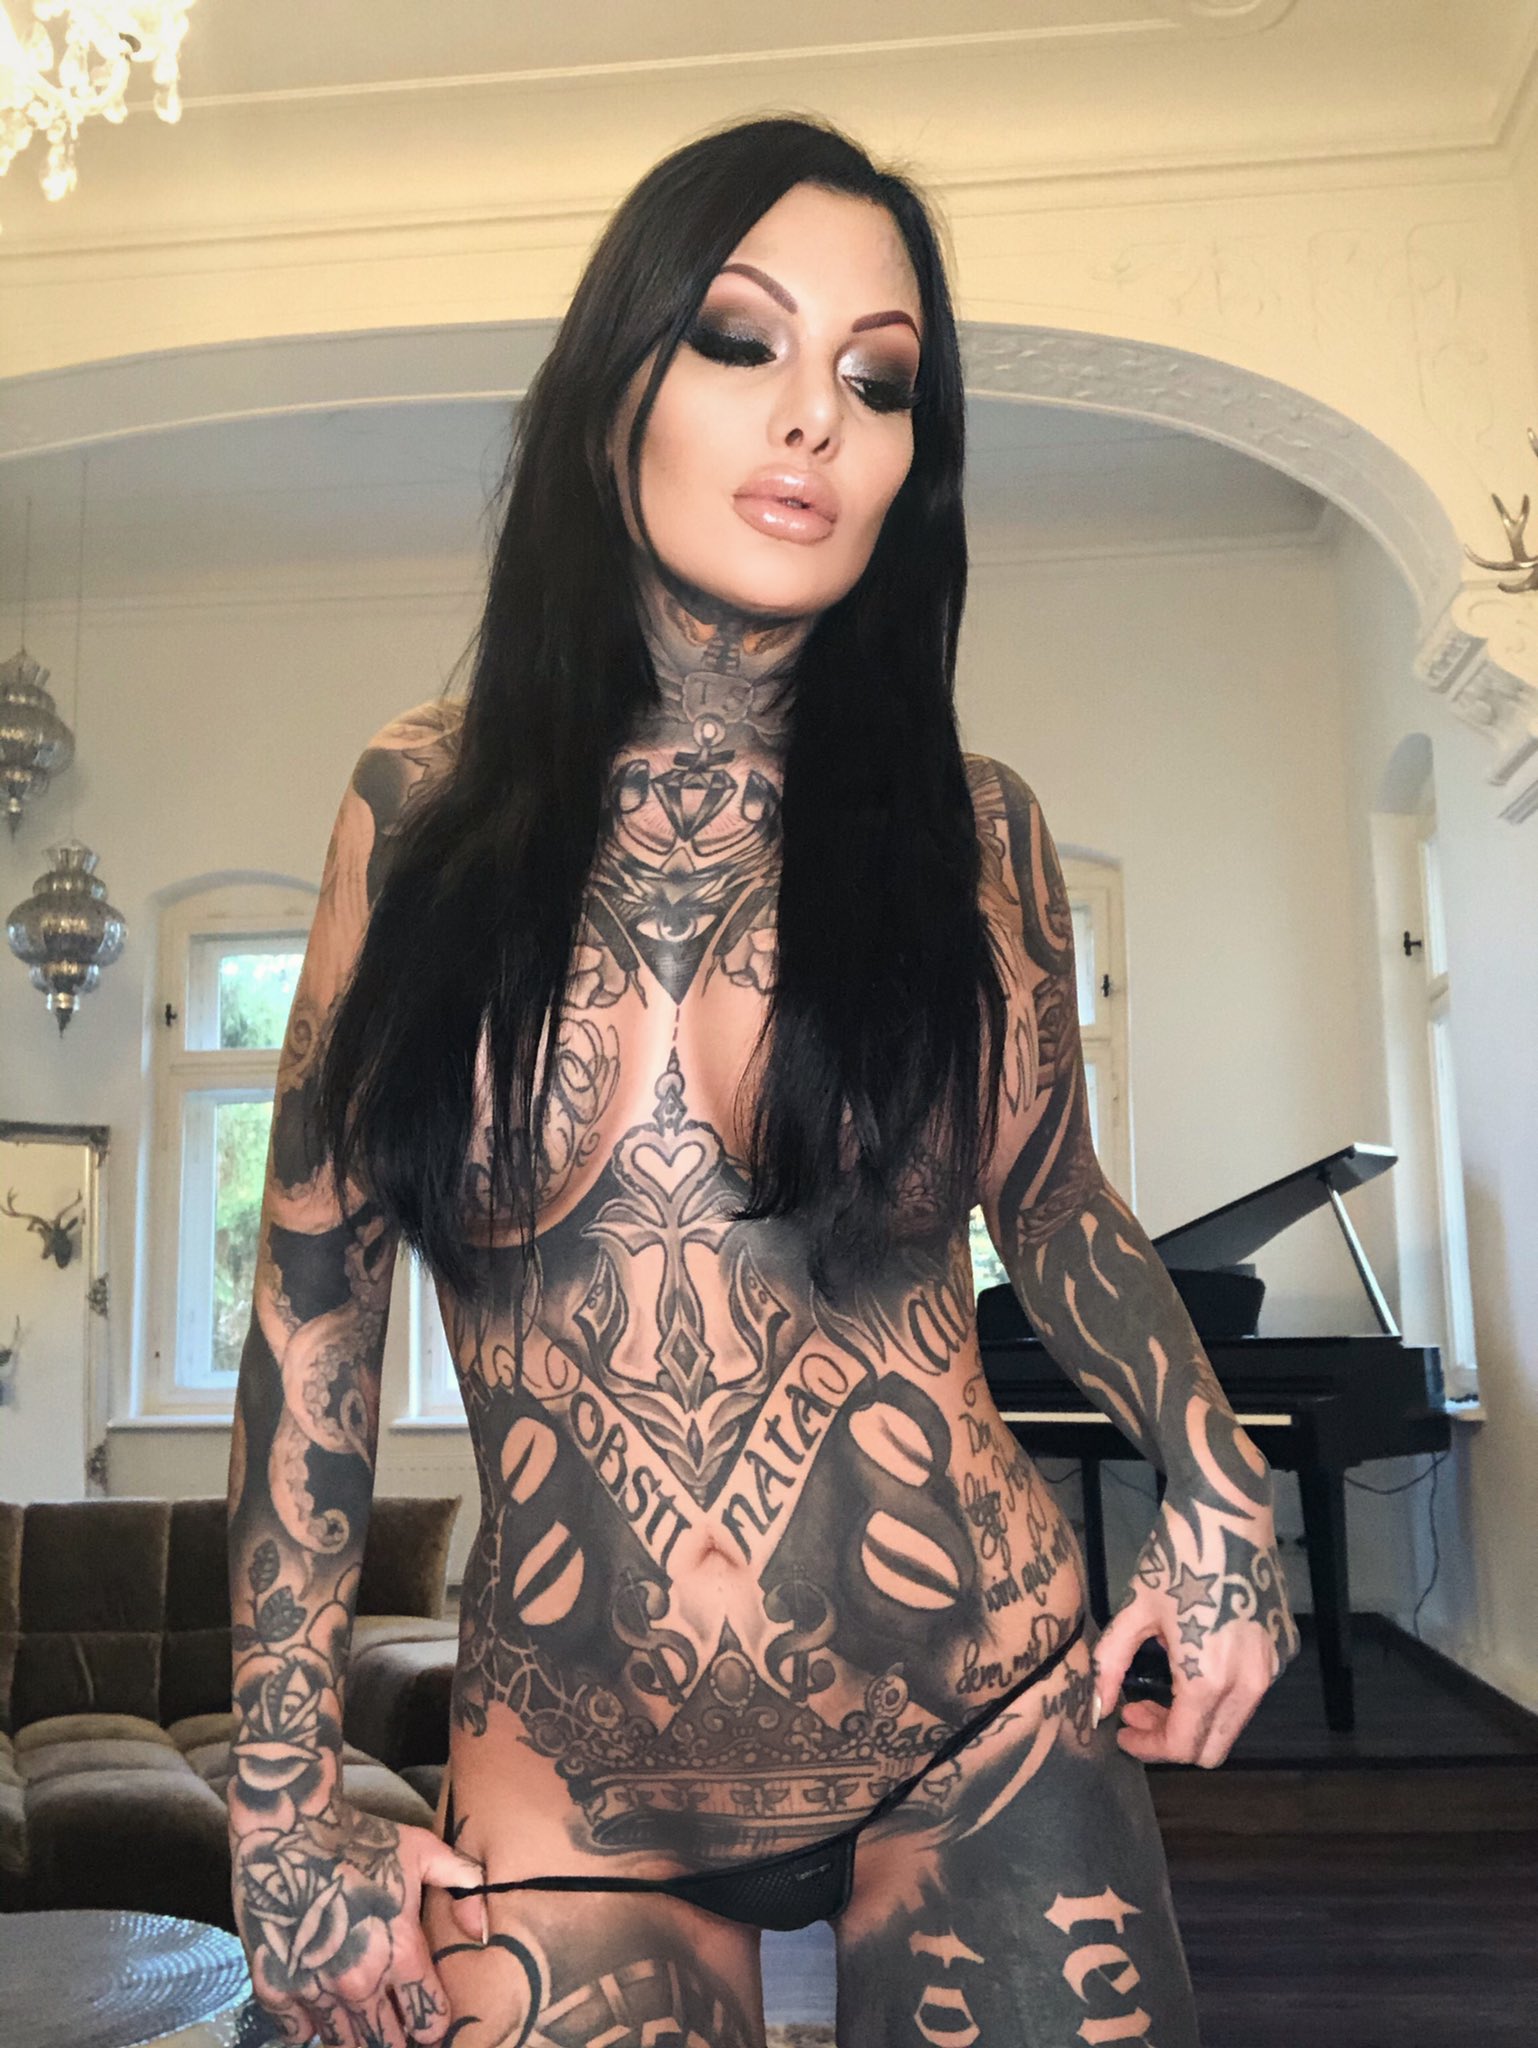 Twitter 上的Mara Inkperial："Welcome to My Twitter 🥰 be sure to Follow ☺️☝🏻  https://t.co/L34NnRcADF" / Twitter